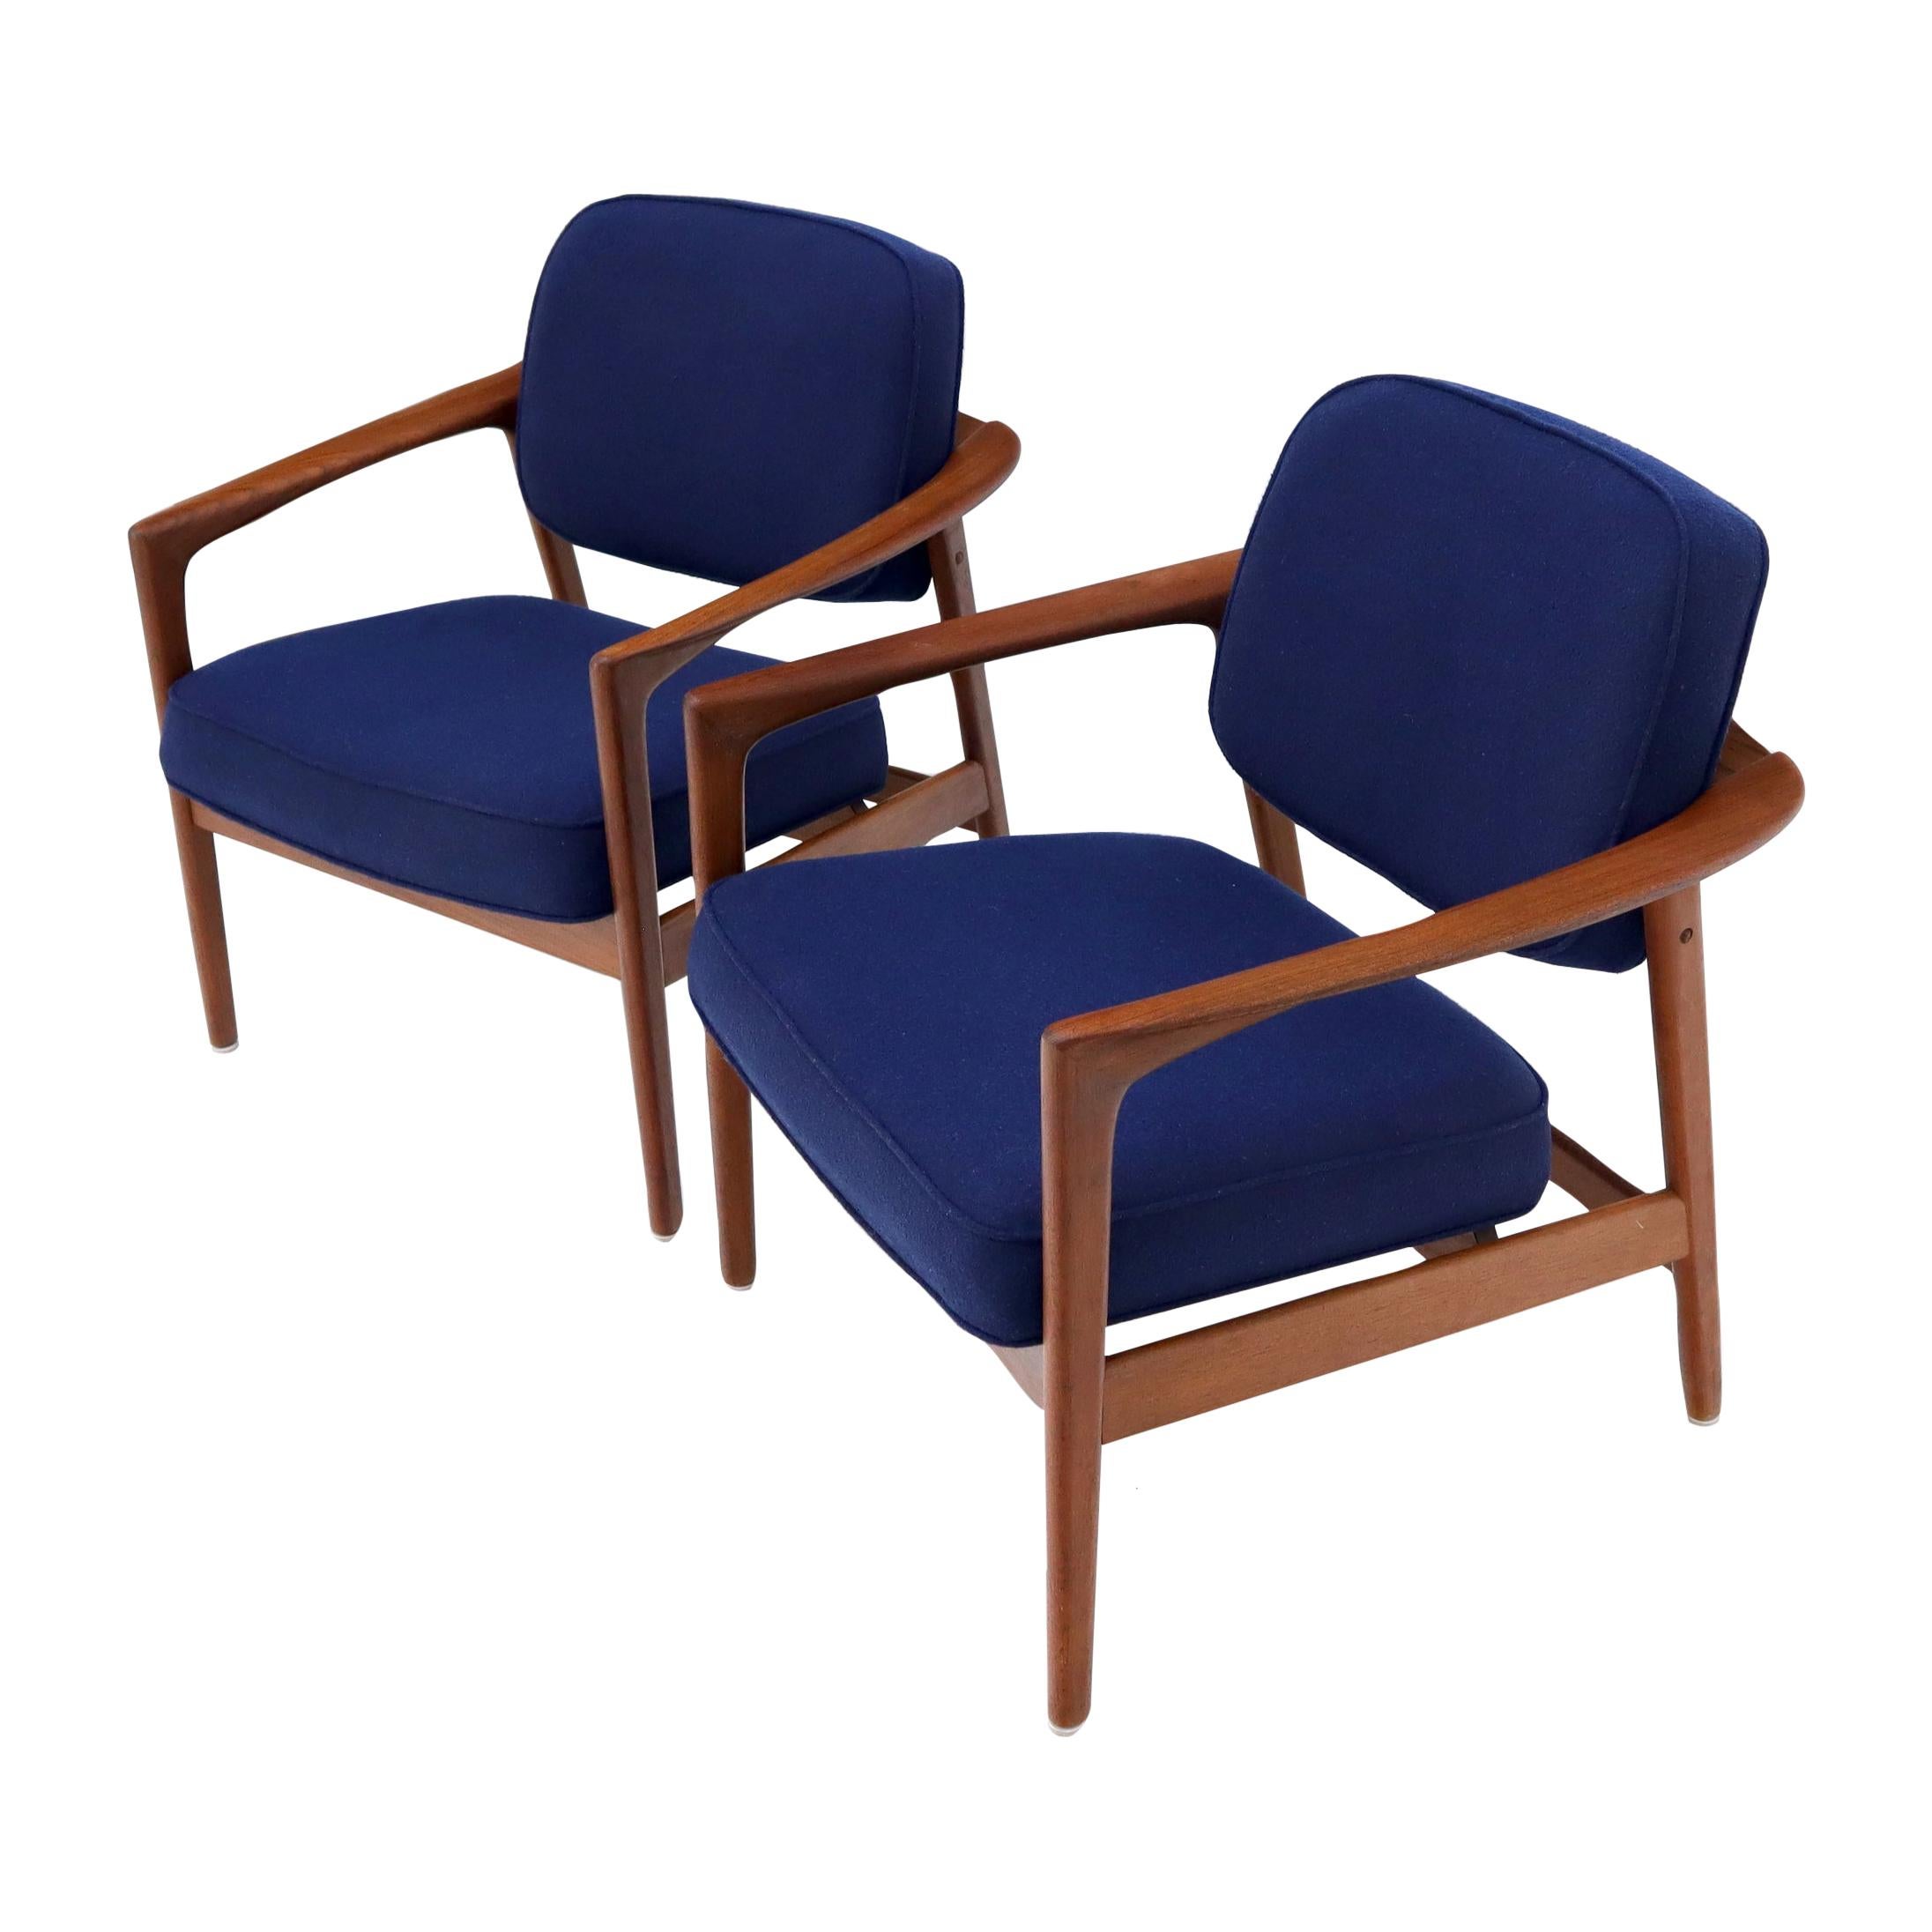 Pair of New Blue Upholstery Teak Danish Mid-Century Modern Arm Lounge Chairs For Sale